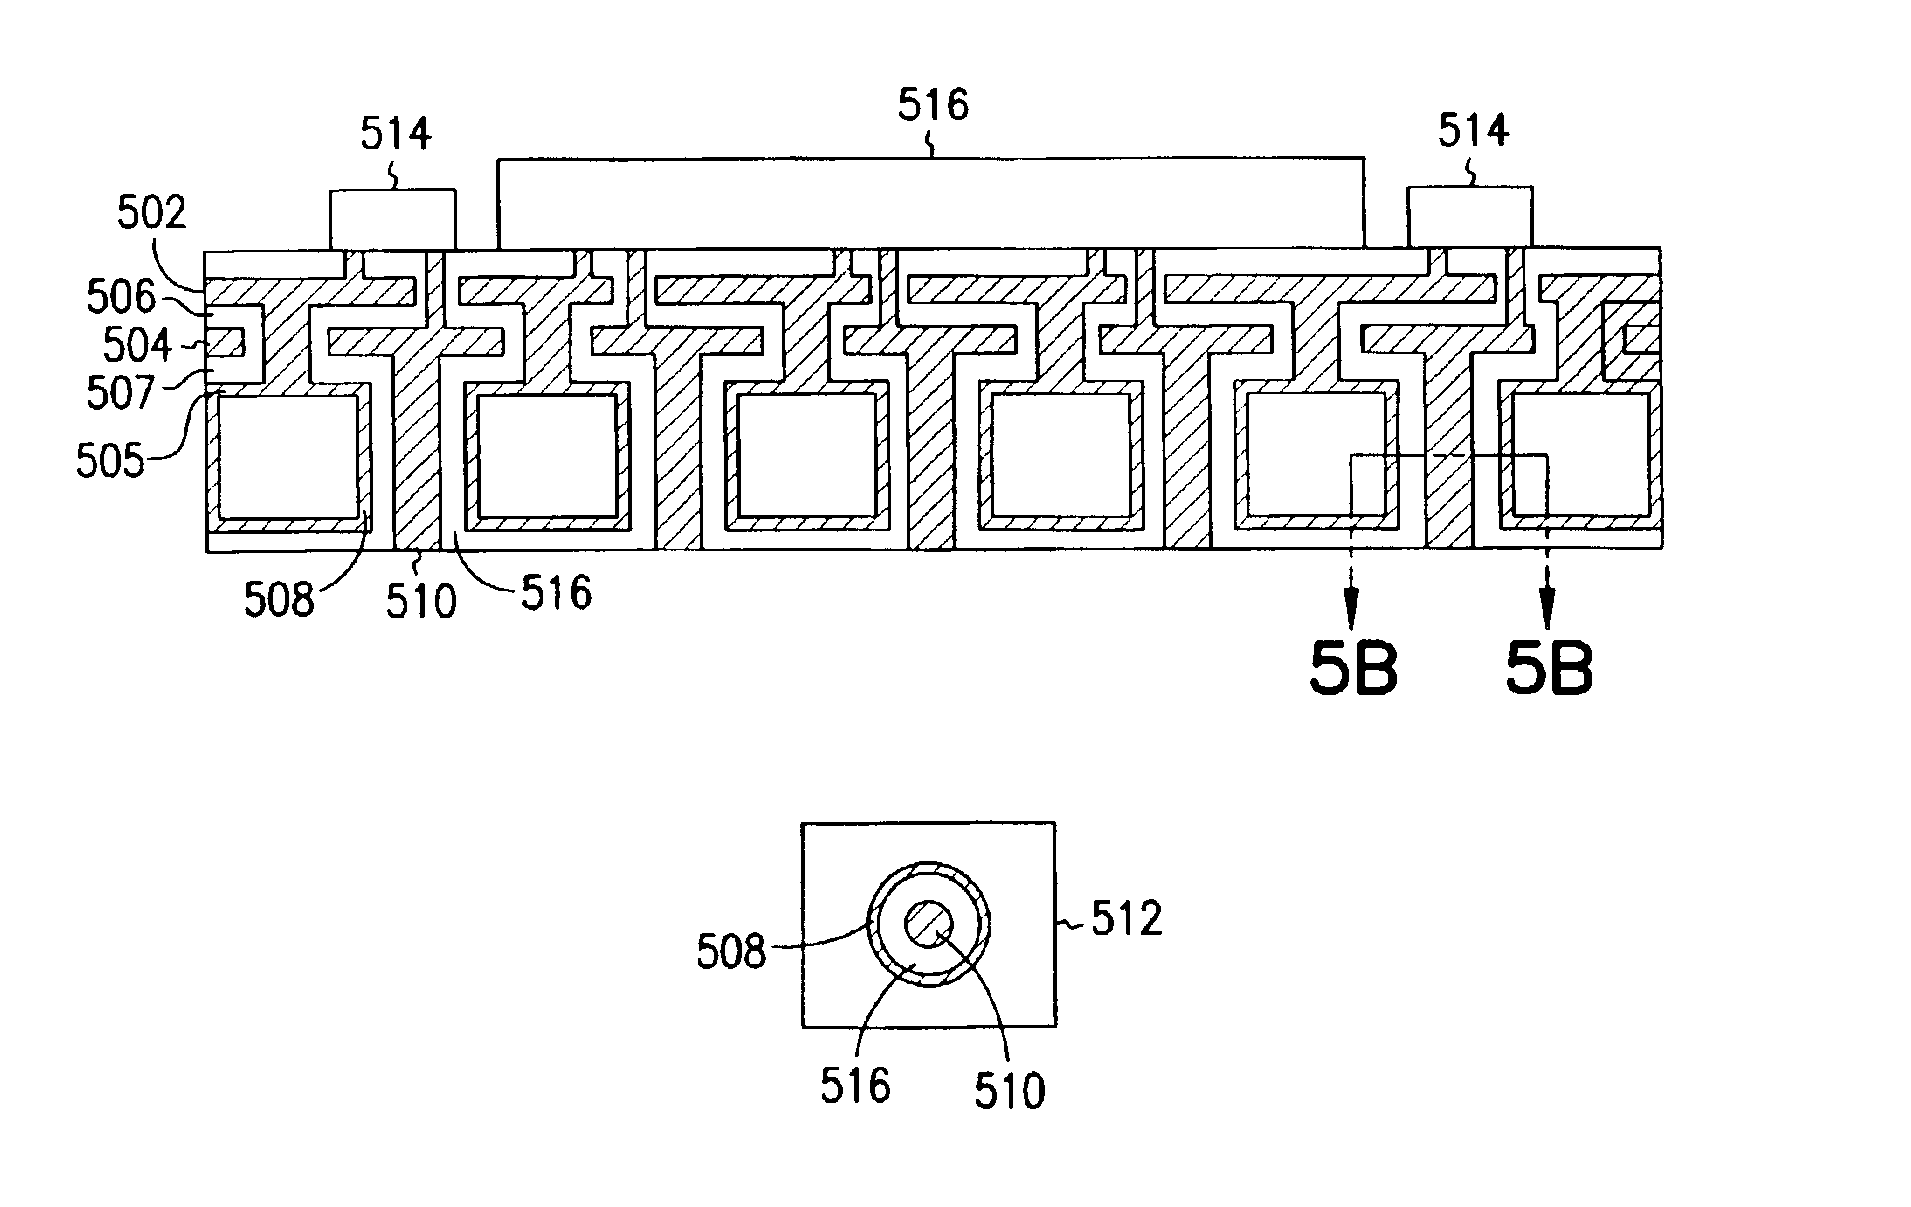 Hybrid capacitor, circuit, and system